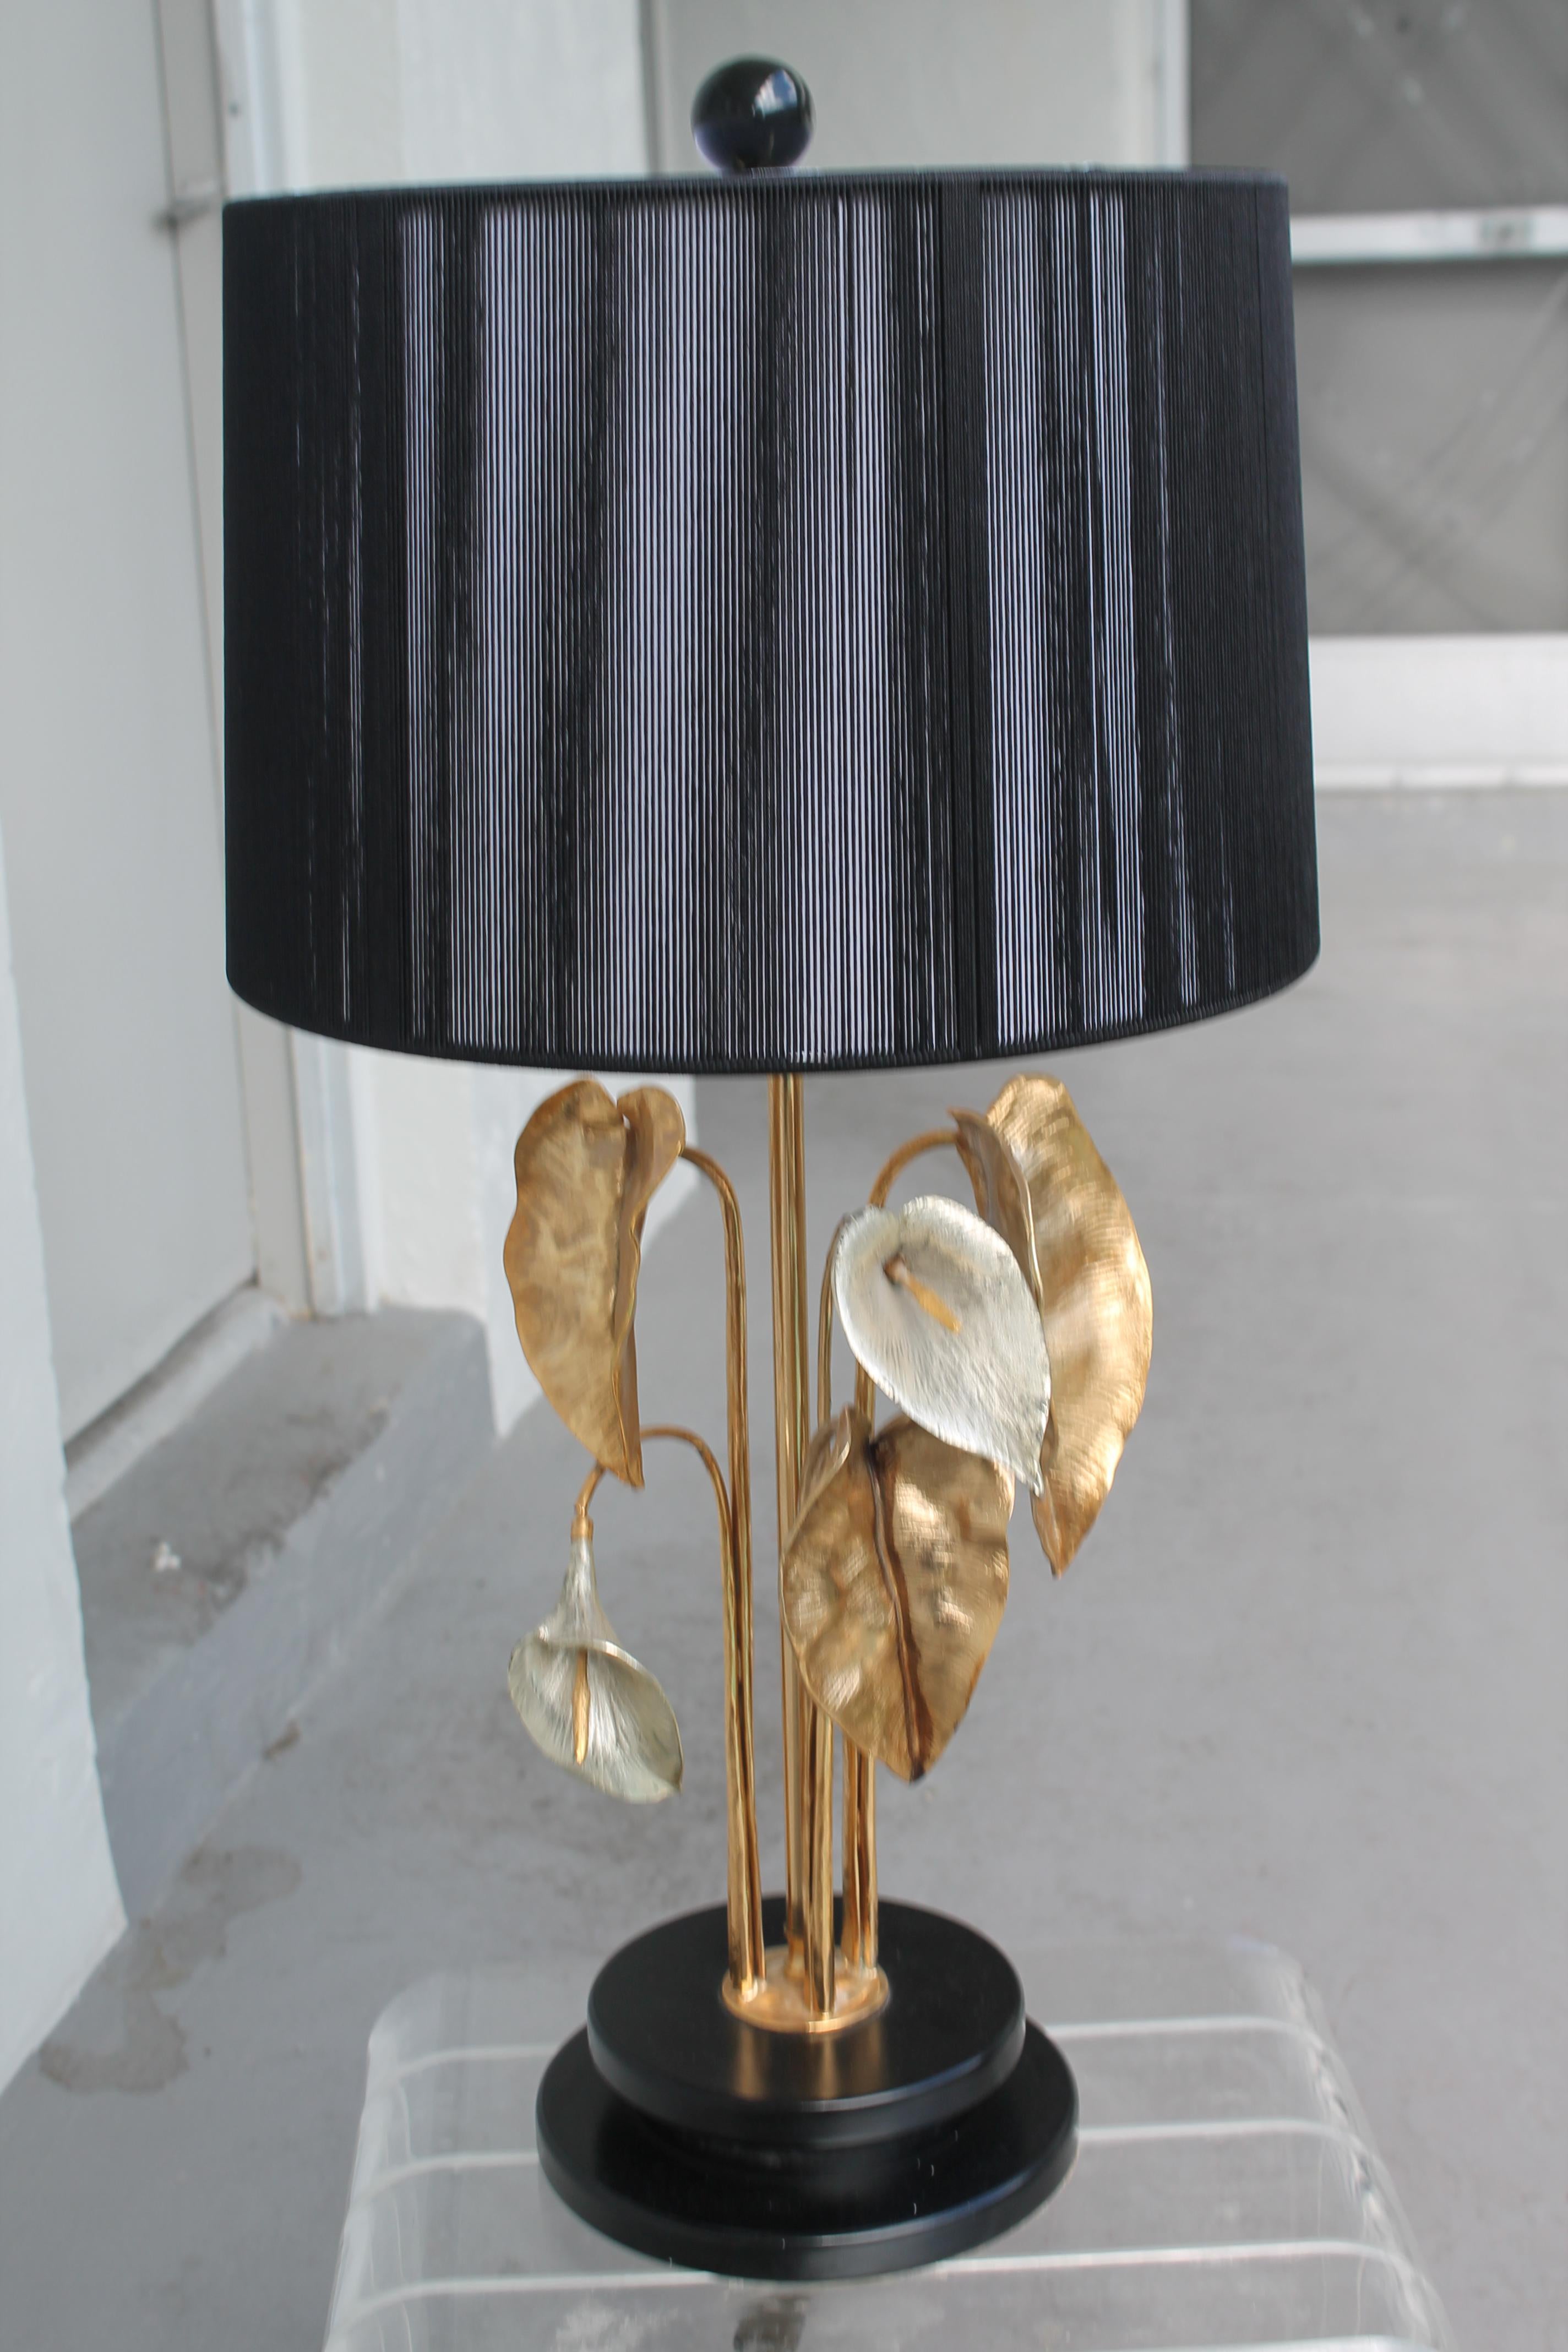 French 1970's Mid Century Modern Nenuphar Bronze Water Lilies Table Lamp attrib. Maison Charles. Beautiful black shade, [new black shade]. Very highly detailed and incredible detail. I purchased this lamp in France as a Chrystiane Charles Lamp but